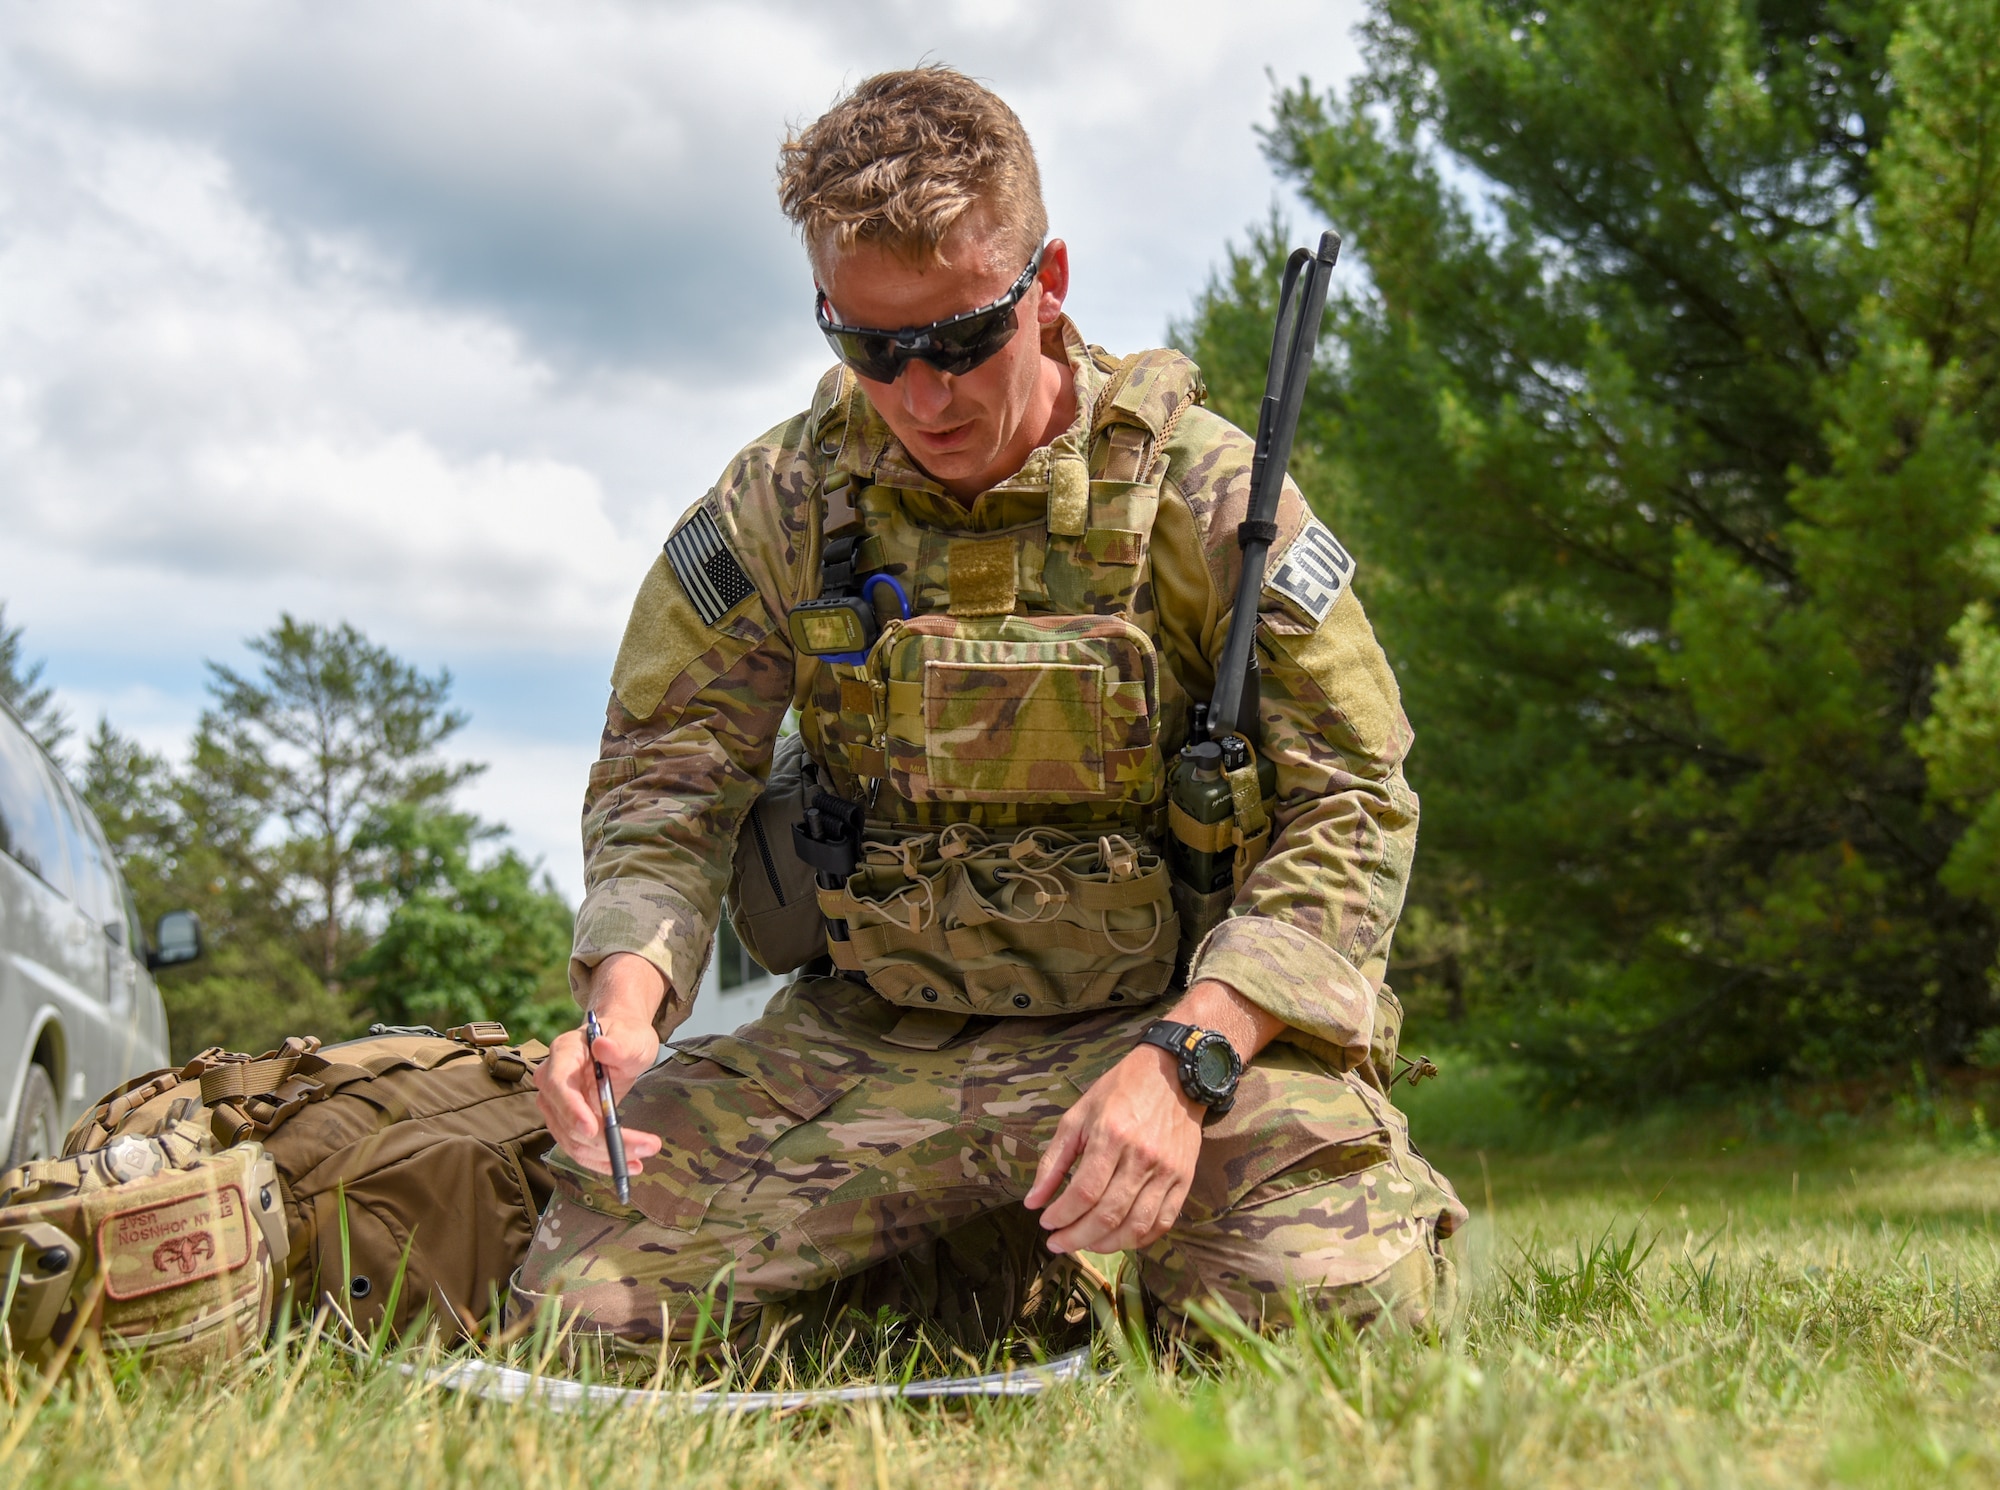 Senior Airman Ethan Johnson, an Explosive Ordnance Disposal technician with the 119th Wing in Hector Field, North Dakota, plans his teams route June 25, 2018, for the Audacious Warrior land navigation compass course at Fort McCoy, Wisconsin. The course allowed Airmen to practice  their skills in map reading, compass use, and pace counting.
(U.S. Air National Guard photo by Airman Cameron Lewis)